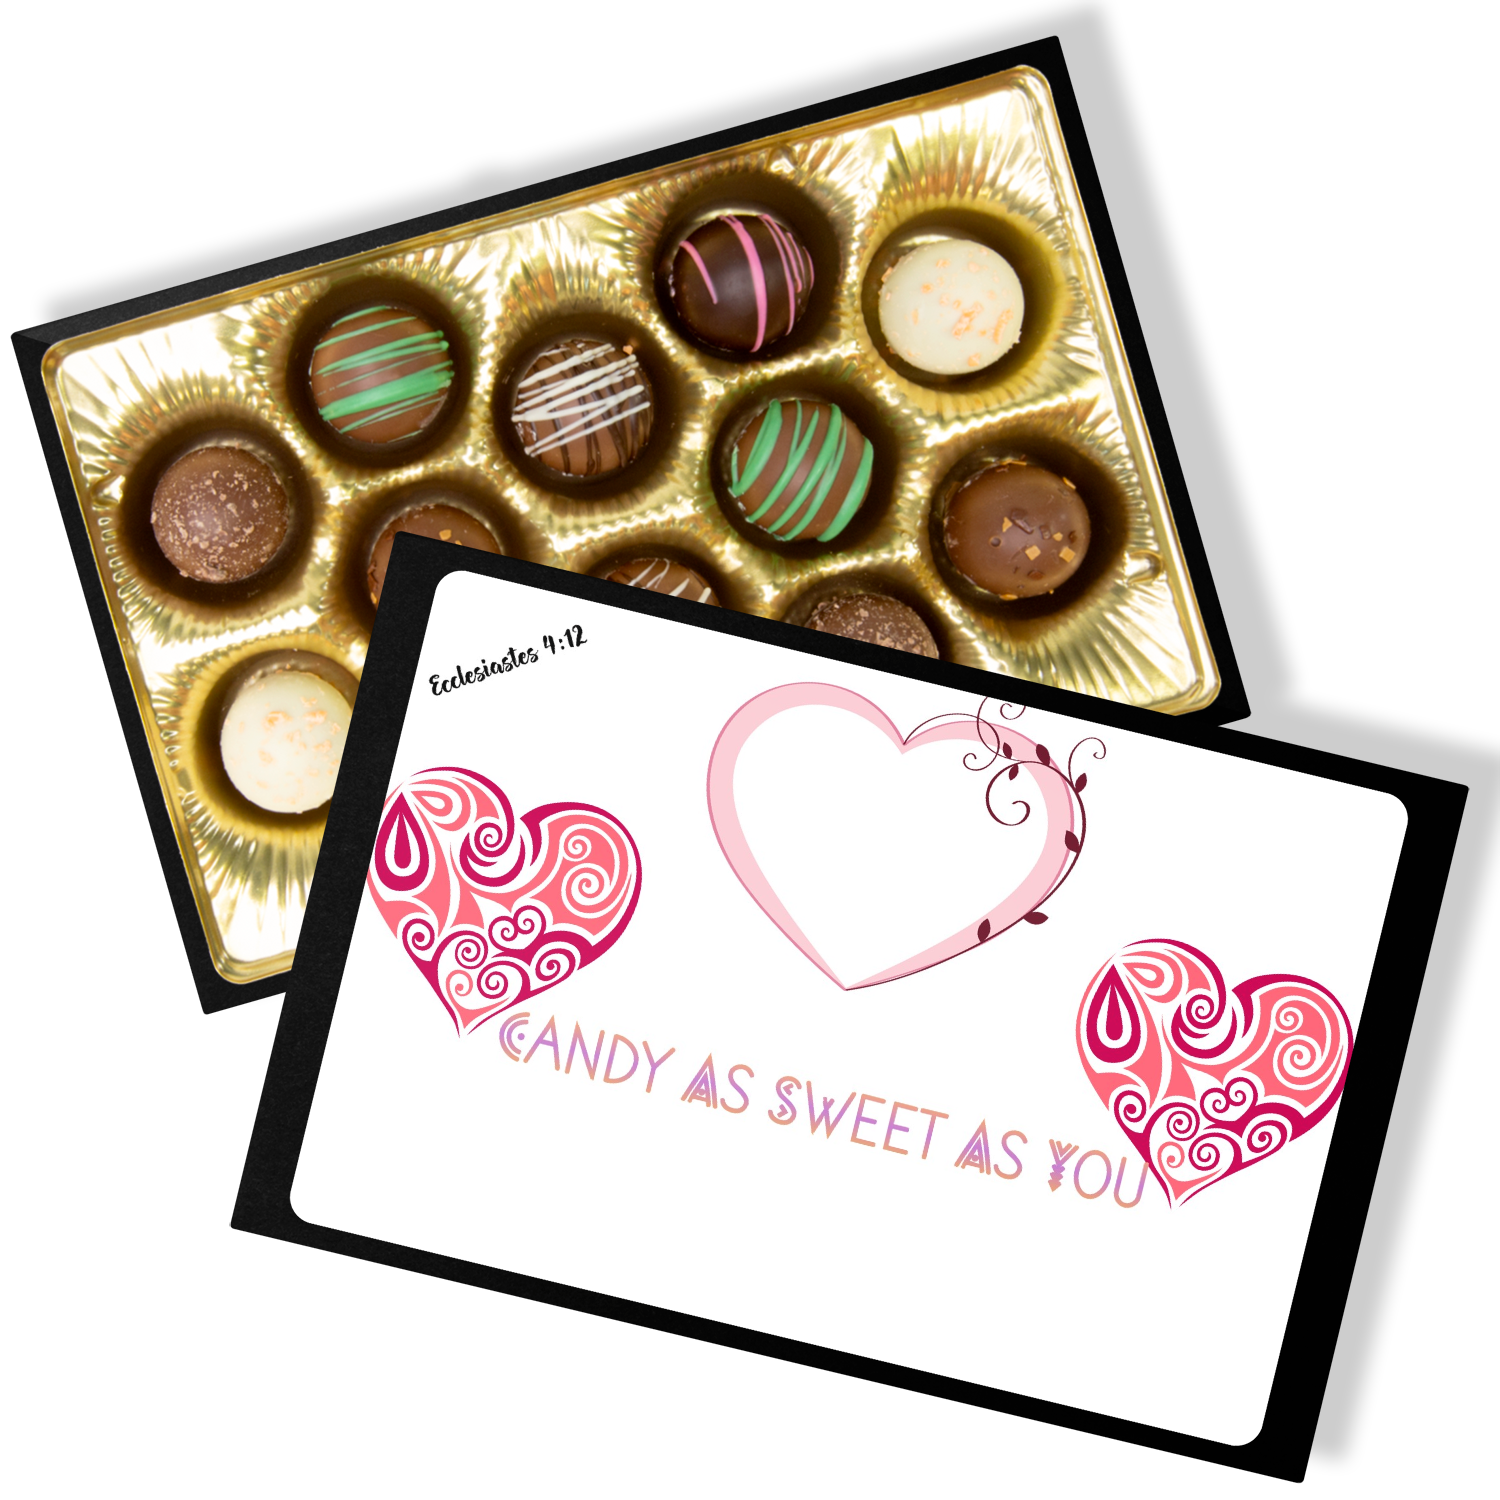 Sweet As You Ecclesiastes 4:12 Handmade Artisan Chocolate Truffle 12 count Gift Box - Ships from The US- Ships from The US - Chocolate Truffle Gift Box at TFC&H Co.